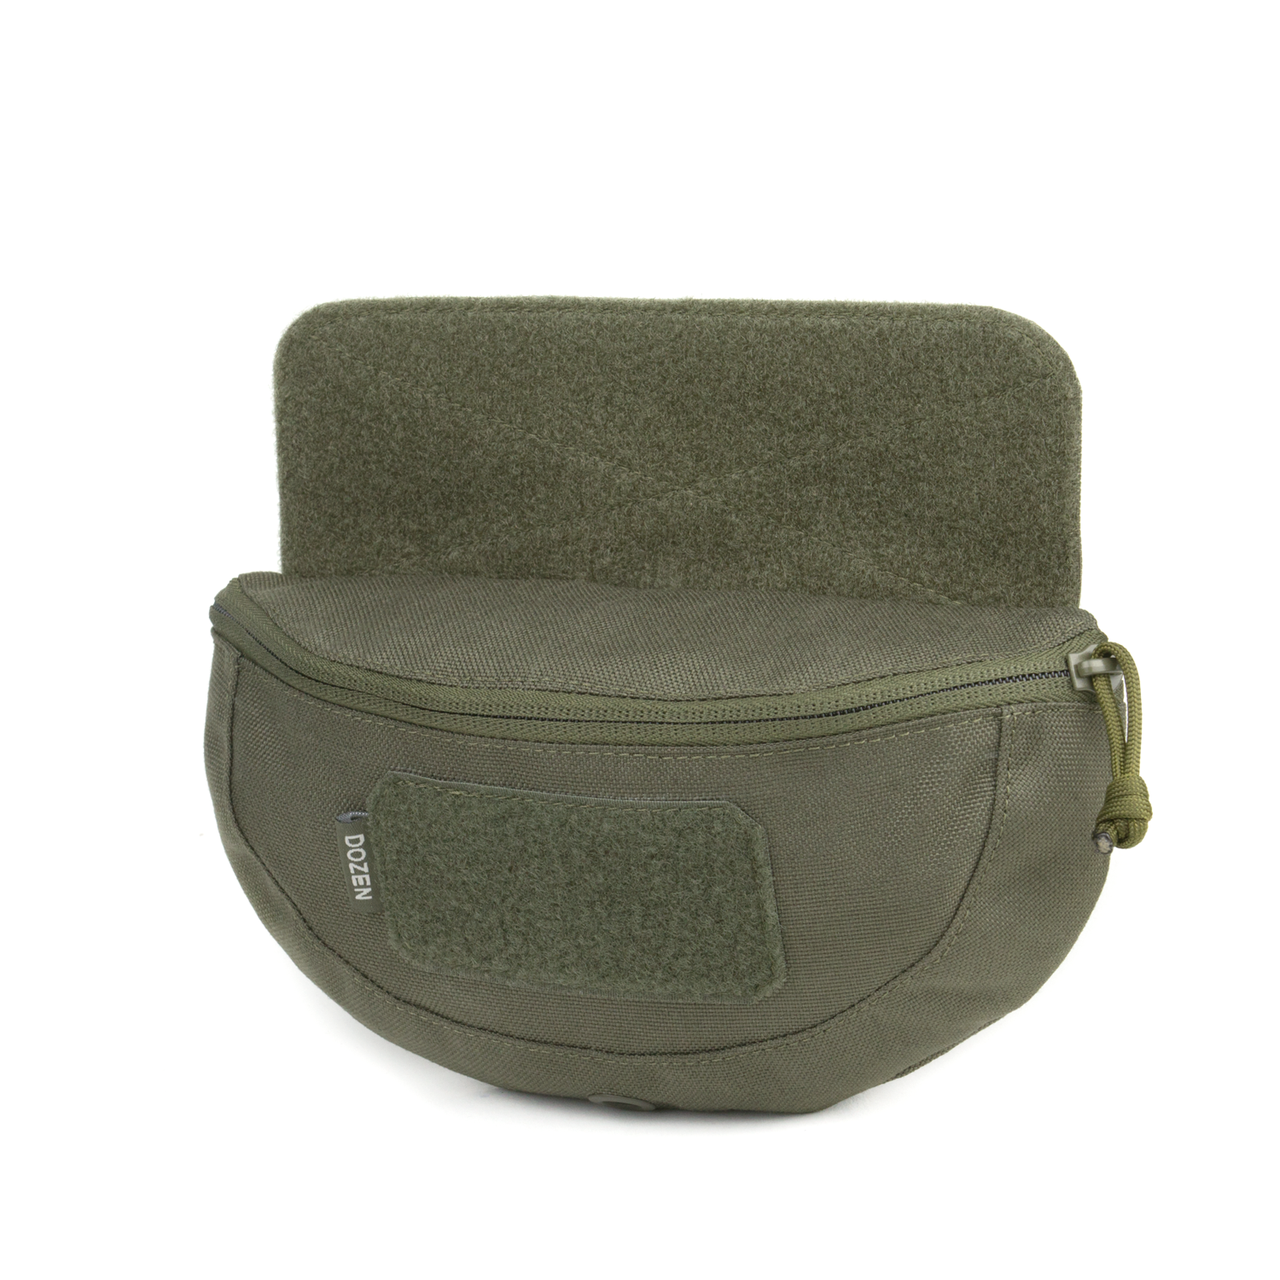 Сумка-напашник Dozen Lid Bag For Plate Carrier "Olive" (12 * 23 см)